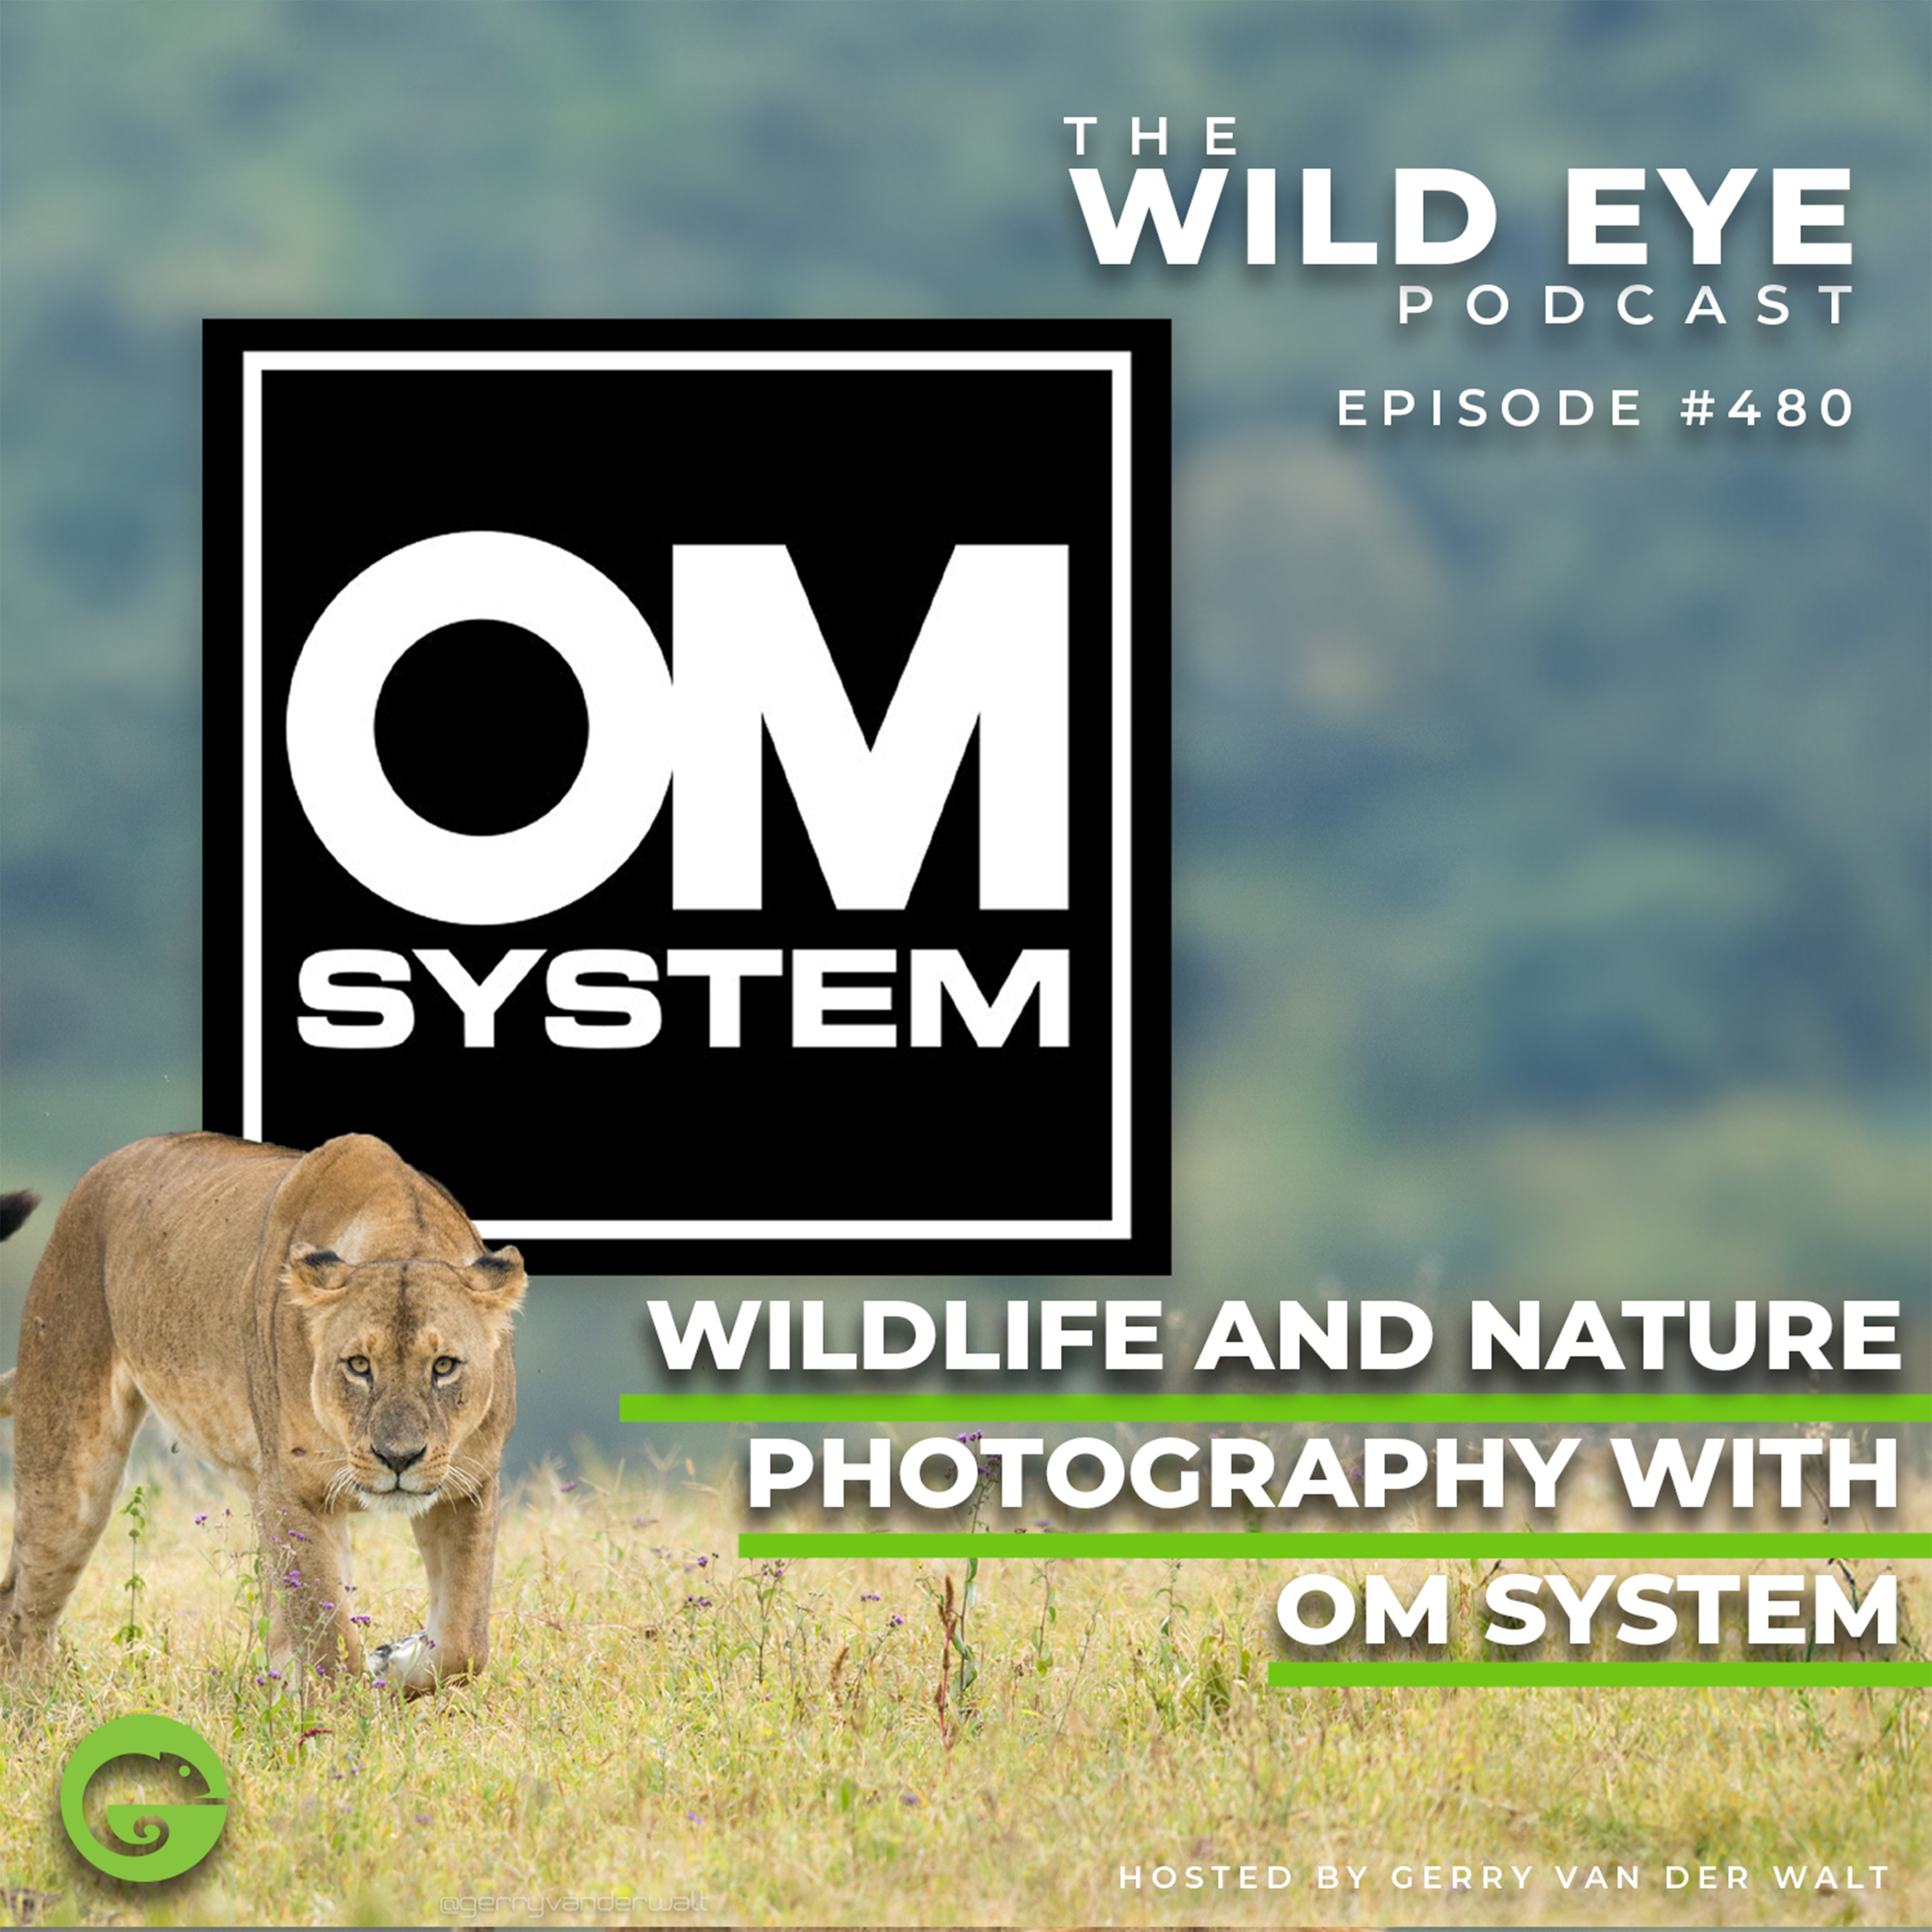 #480 - Wildlife and nature photography with OM System